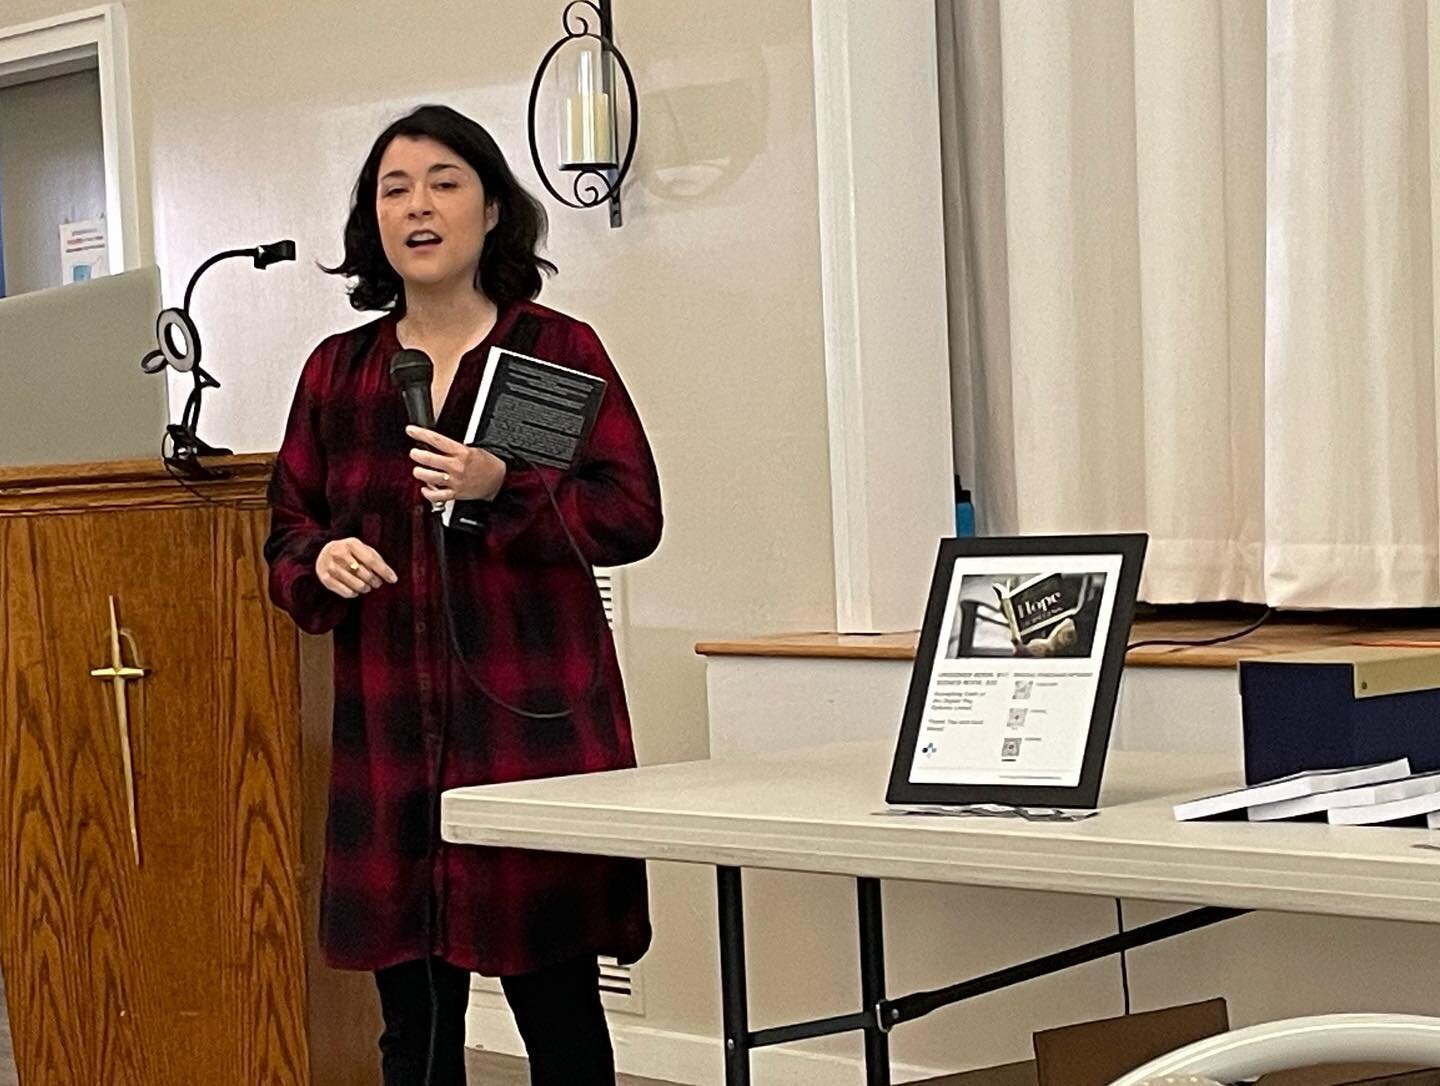 A wonderful event talking about #faith and my father&rsquo;s remarkable healing journey &hearts;️ A tremendous thanks to @firstchurchmethuen and Pastor @ingrahambill for inviting me! &hearts;️
If you&rsquo;d like to invite me to speak please reach ou